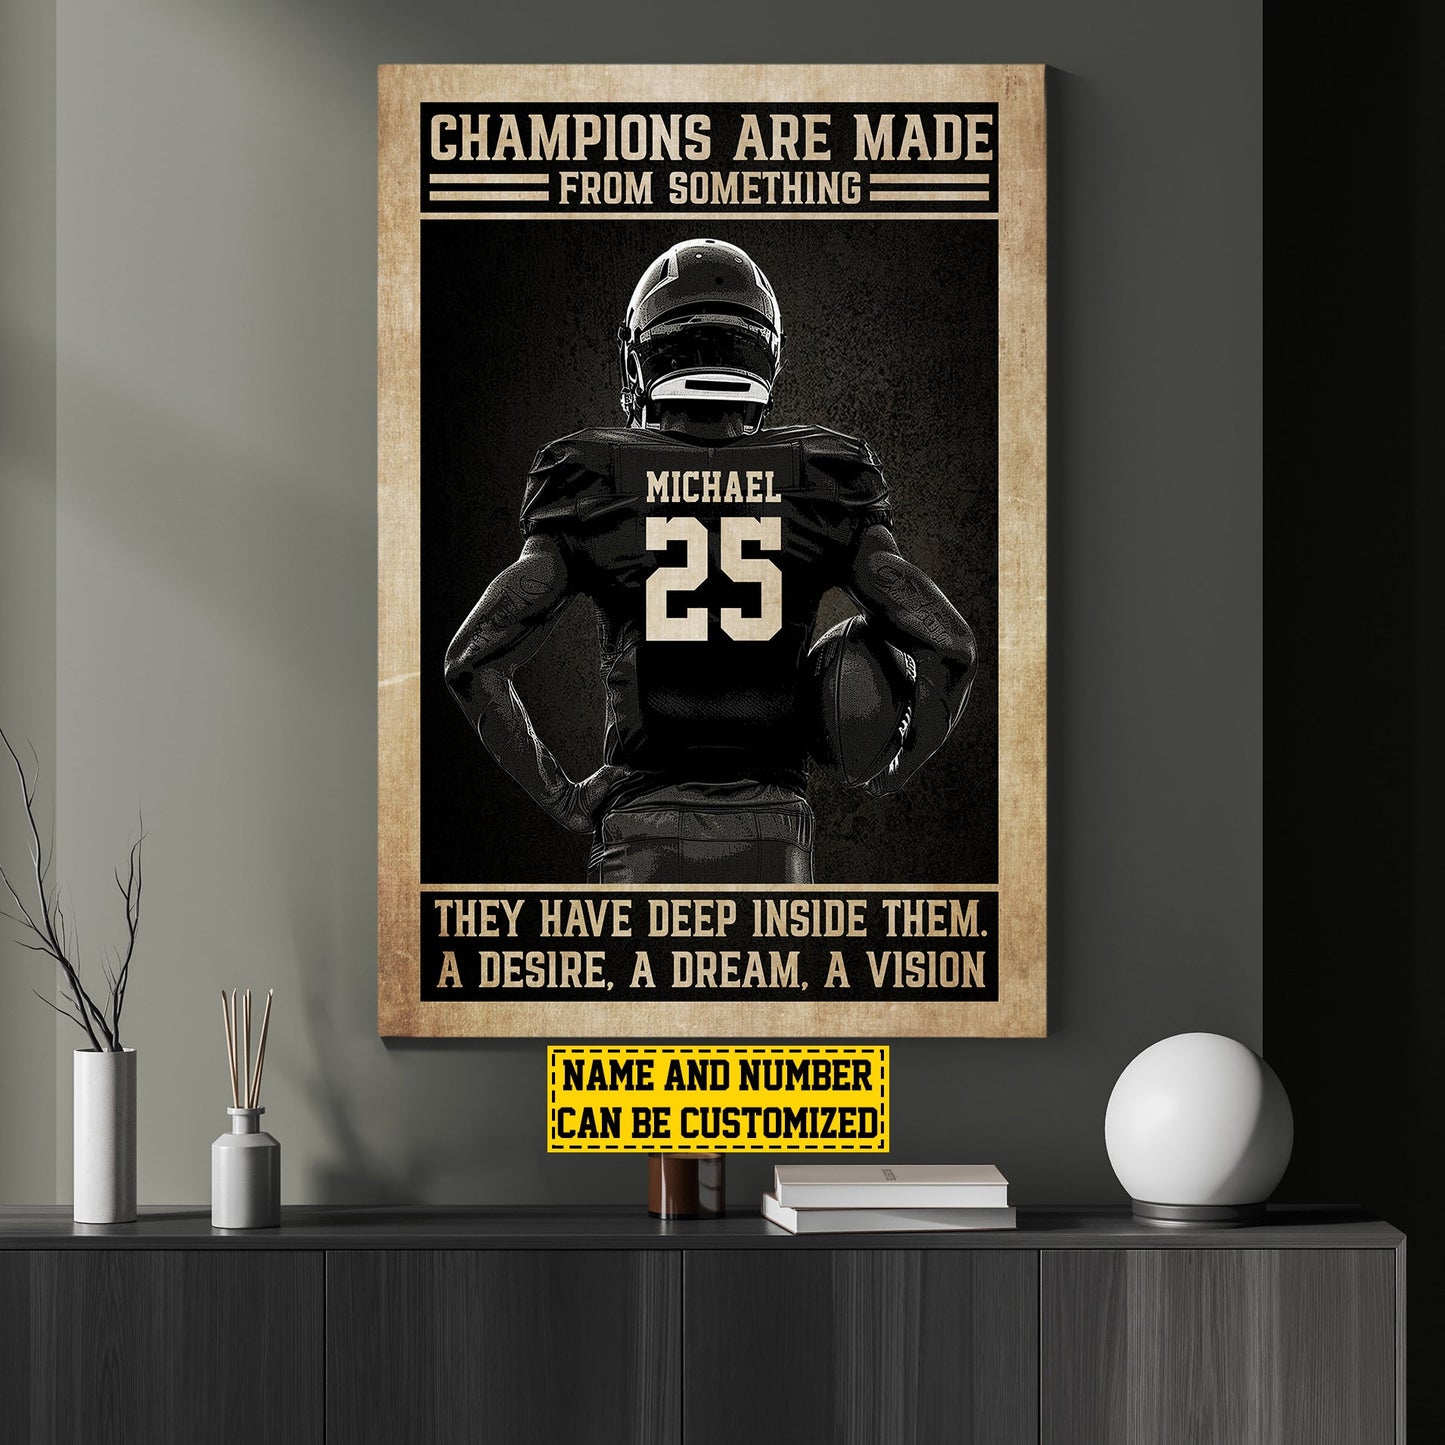 Personalized Football Canvas Painting, Champions Are Made From Something, Inspirational Quotes Wall Art Decor, Poster Gift For Football Lovers